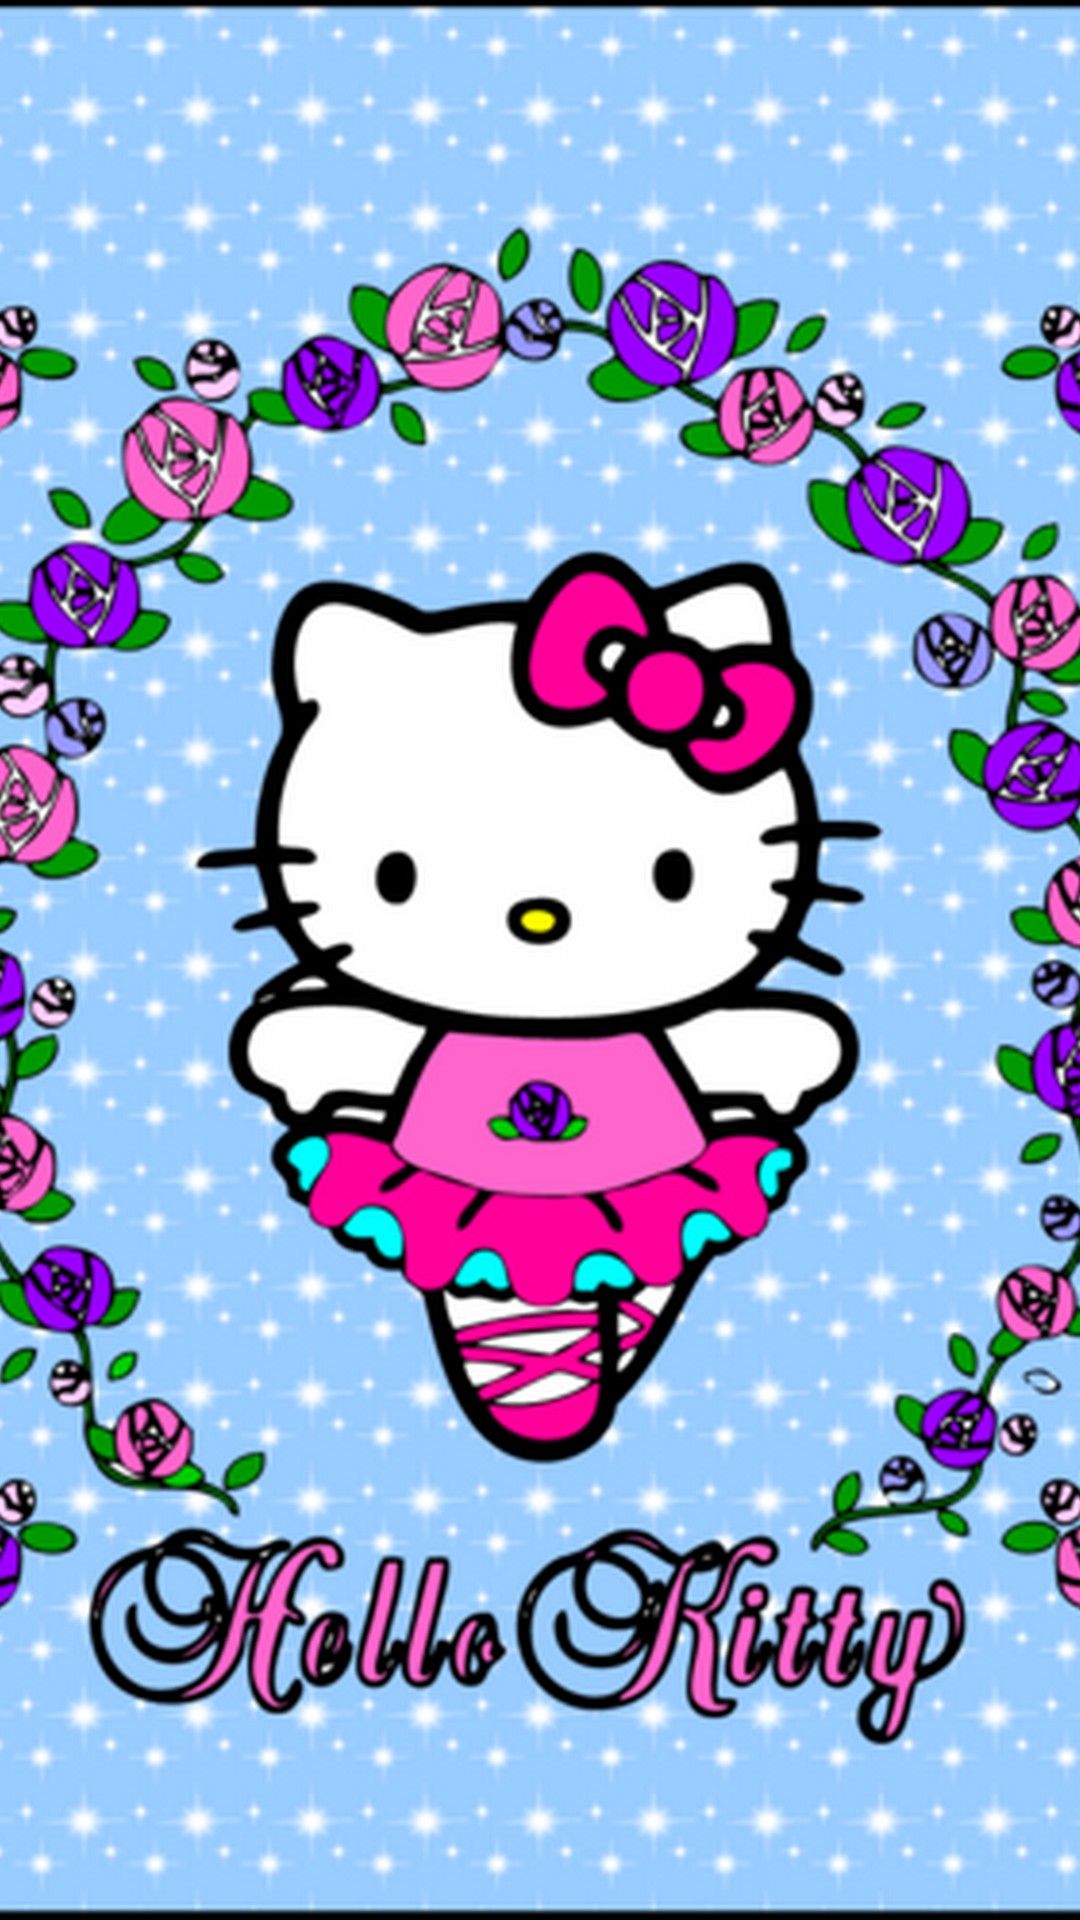 Wallpaper Sanrio Hello Kitty Android Android Wallpaper